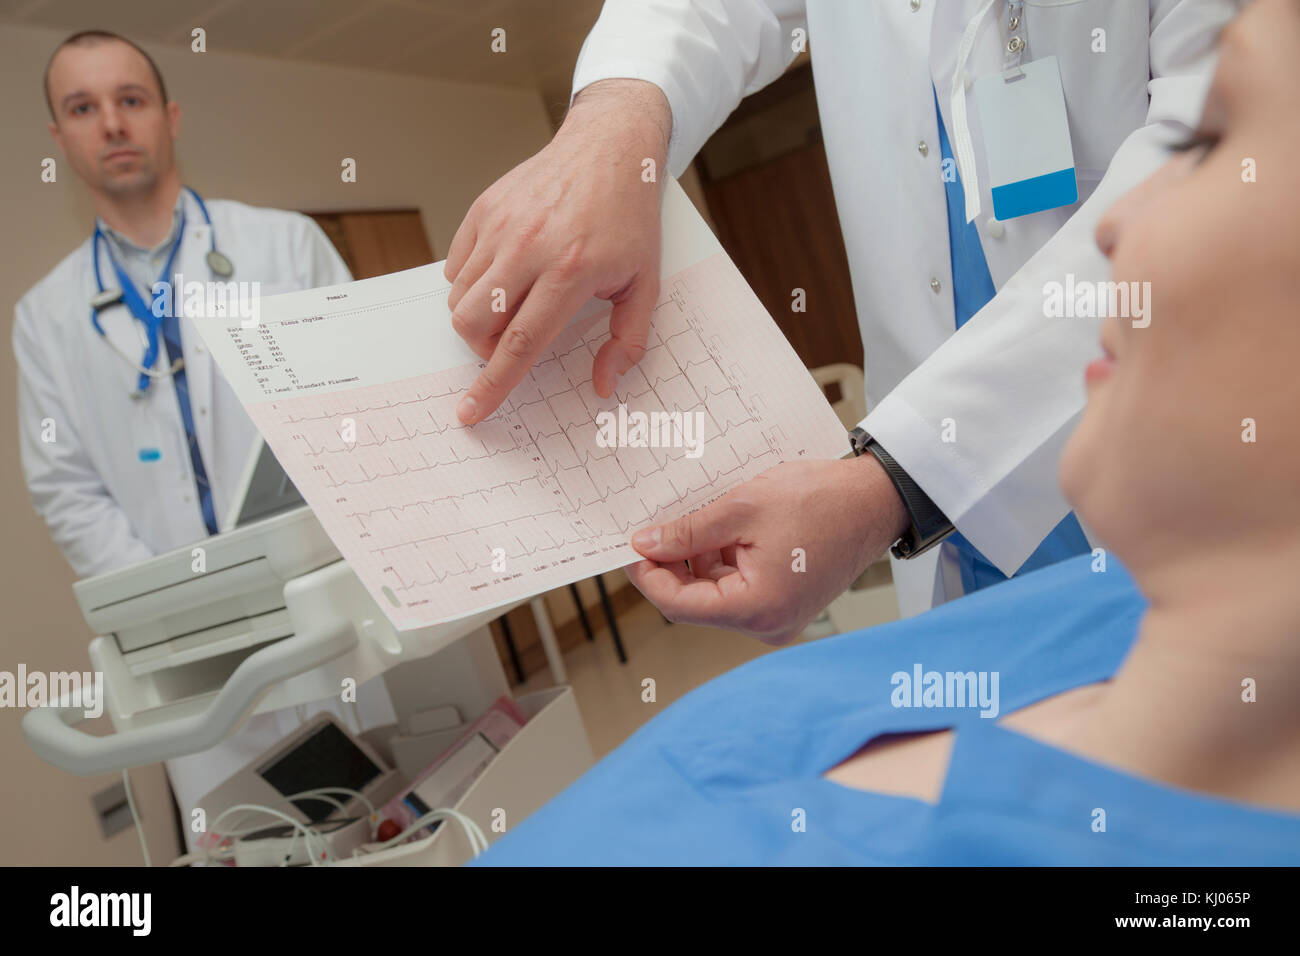 A cardiogram with a normal heart beat rate is shown to a pleased young female patient. Stock Photo